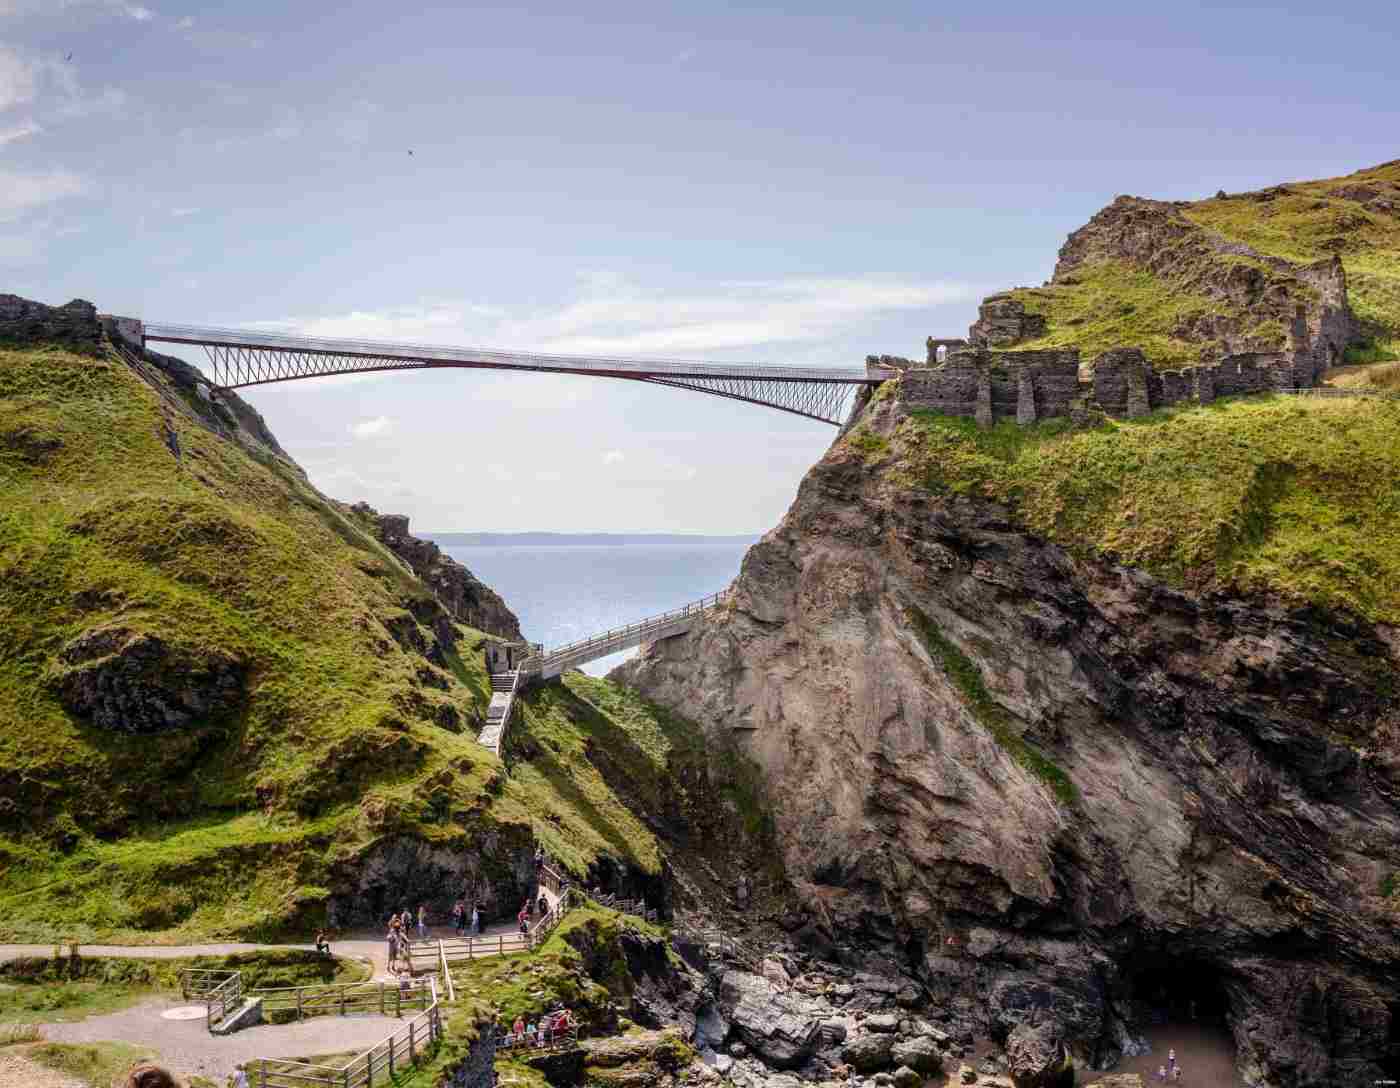 view and landscape of tintagel castle in cornwall and hanging bridge